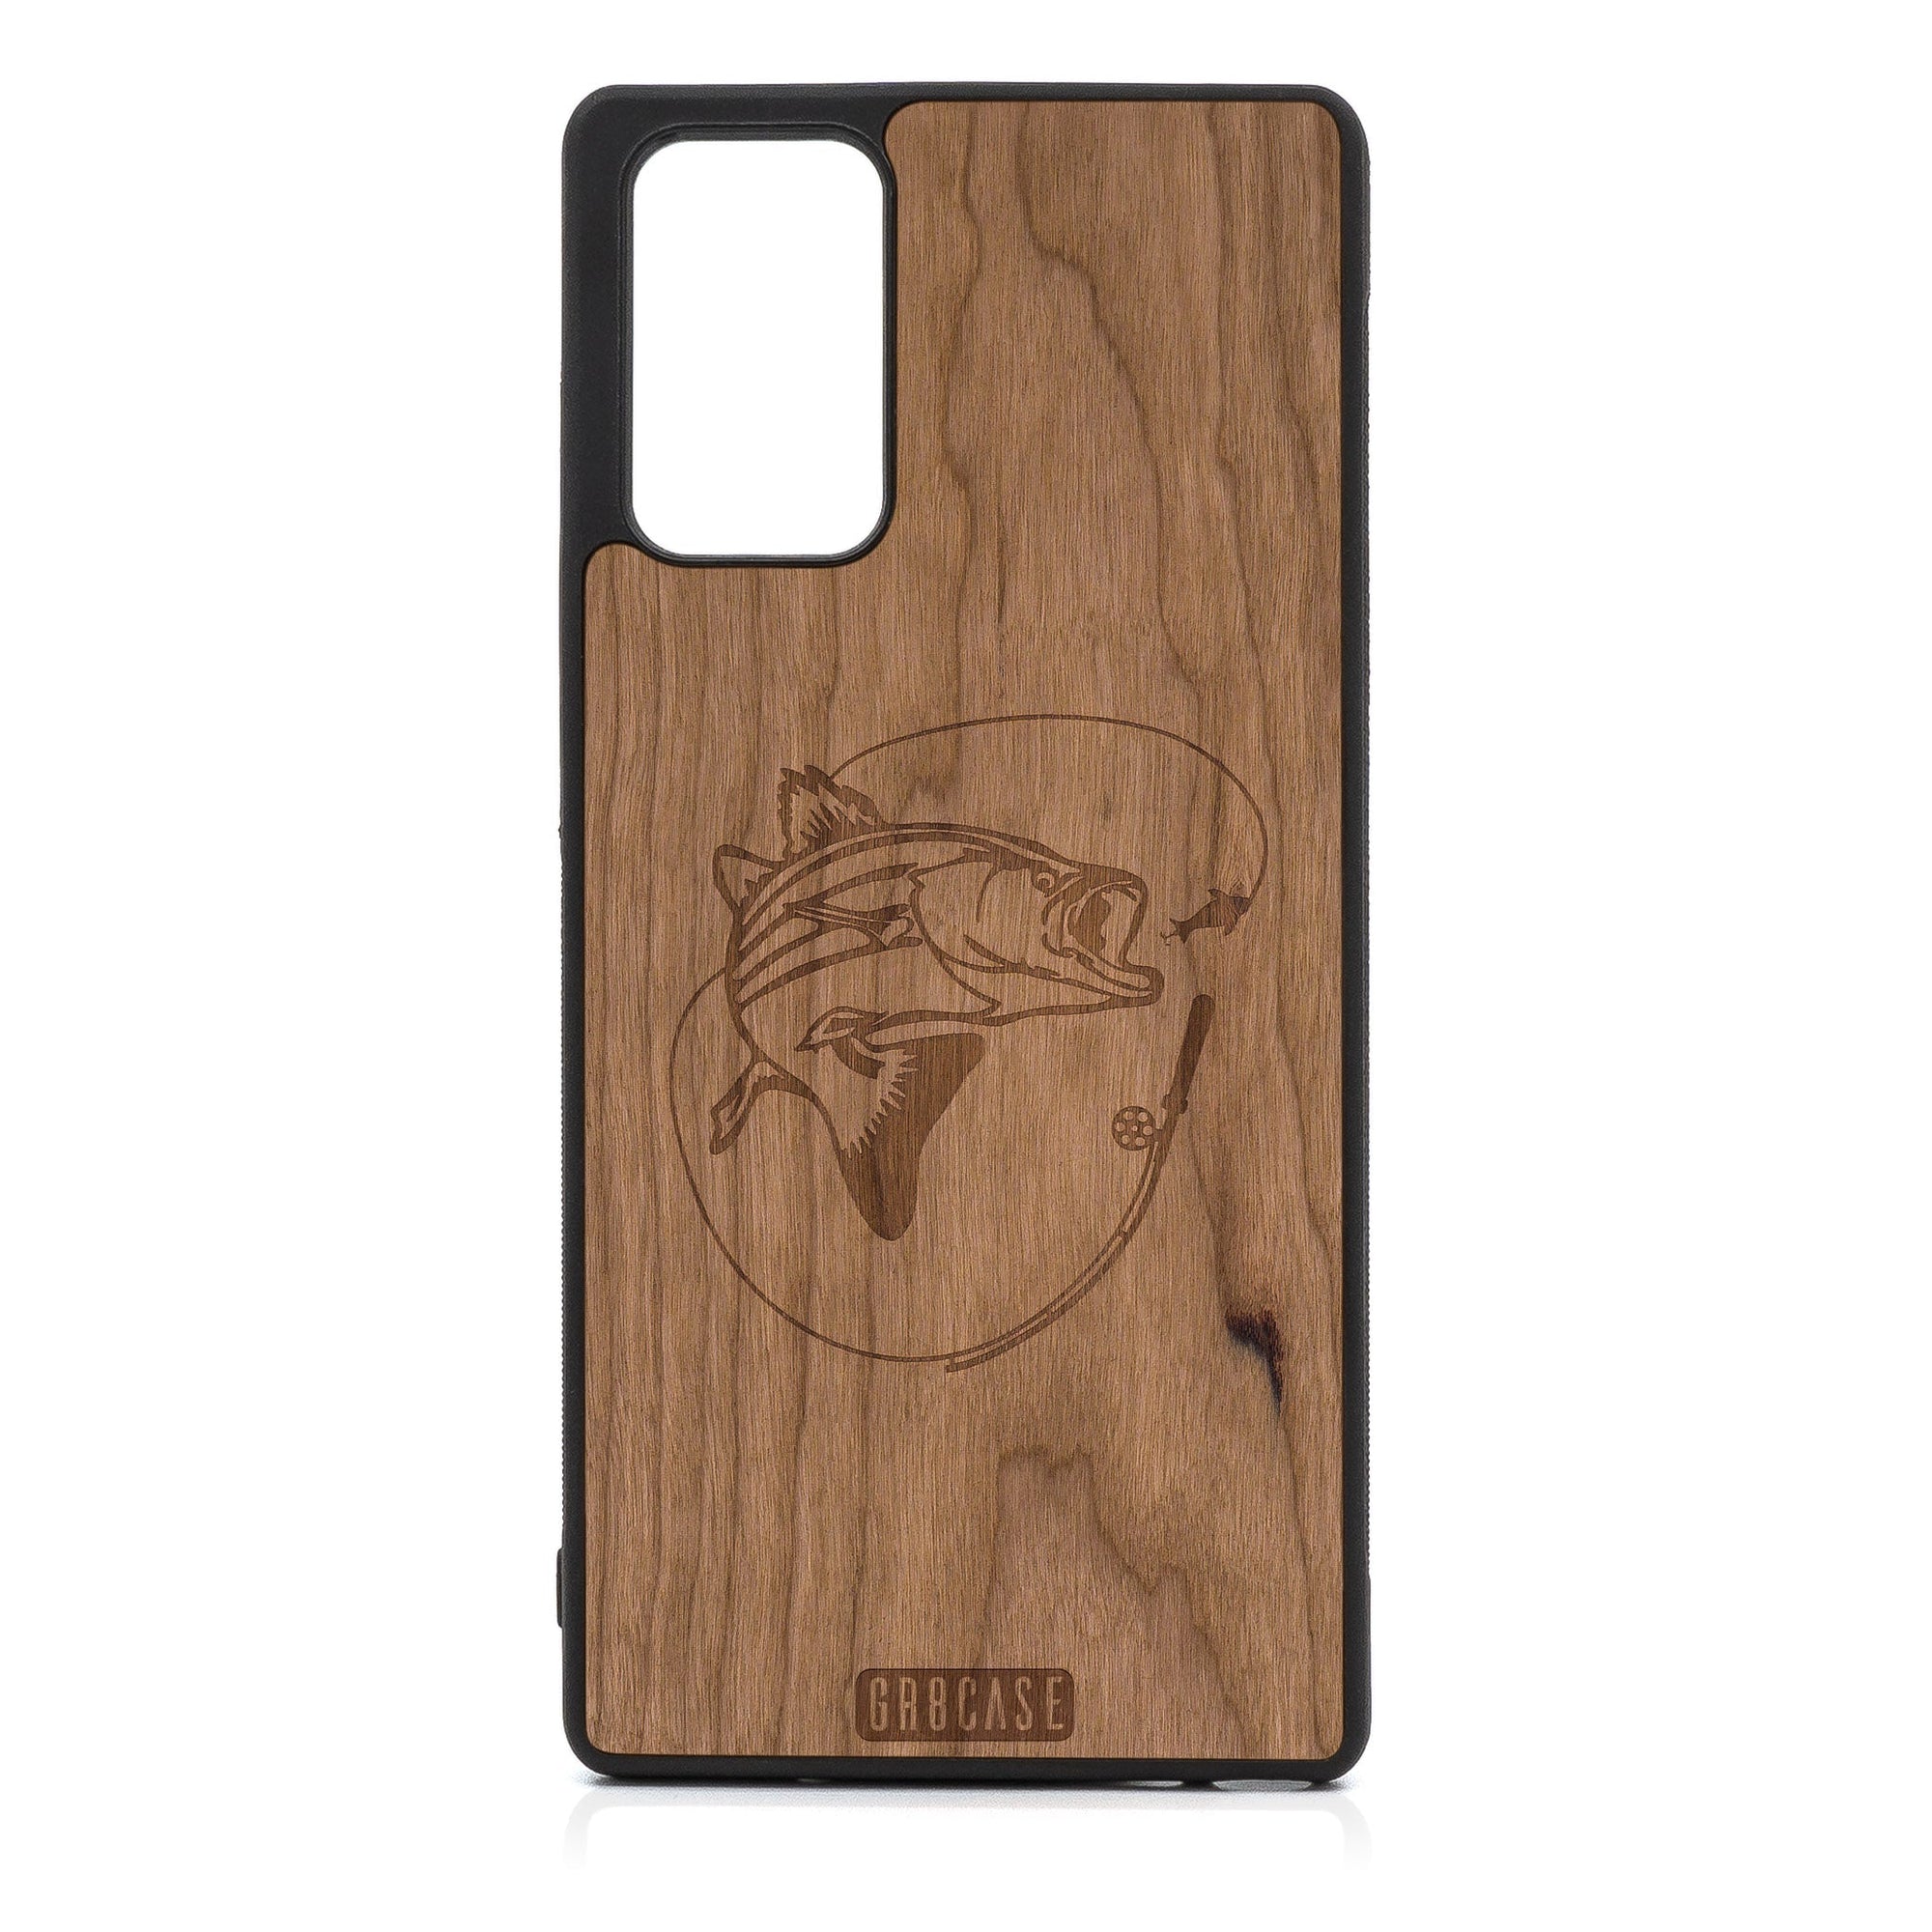 Fish and Reel Design Wood Case For Samsung Galaxy A73 5G